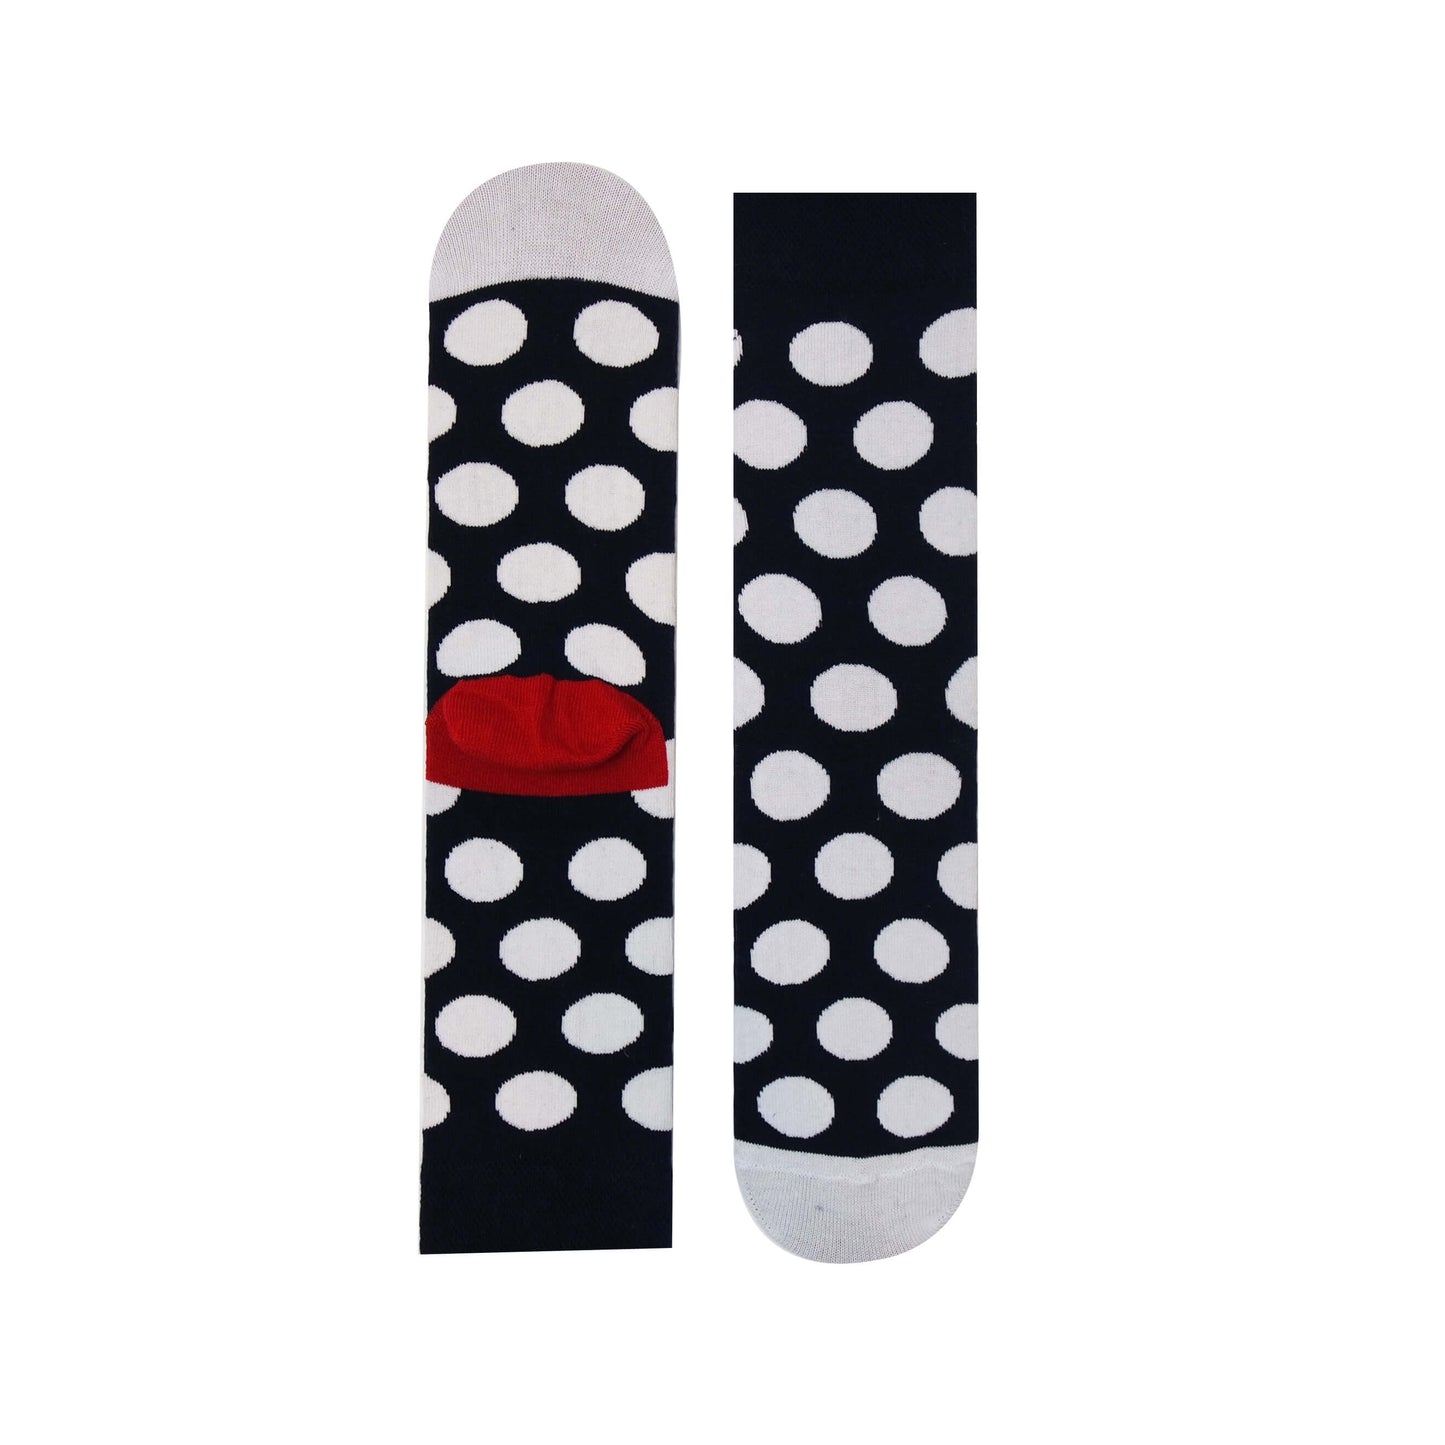 women's cotton socks with a playful polka dot pattern, combining style and comfort.